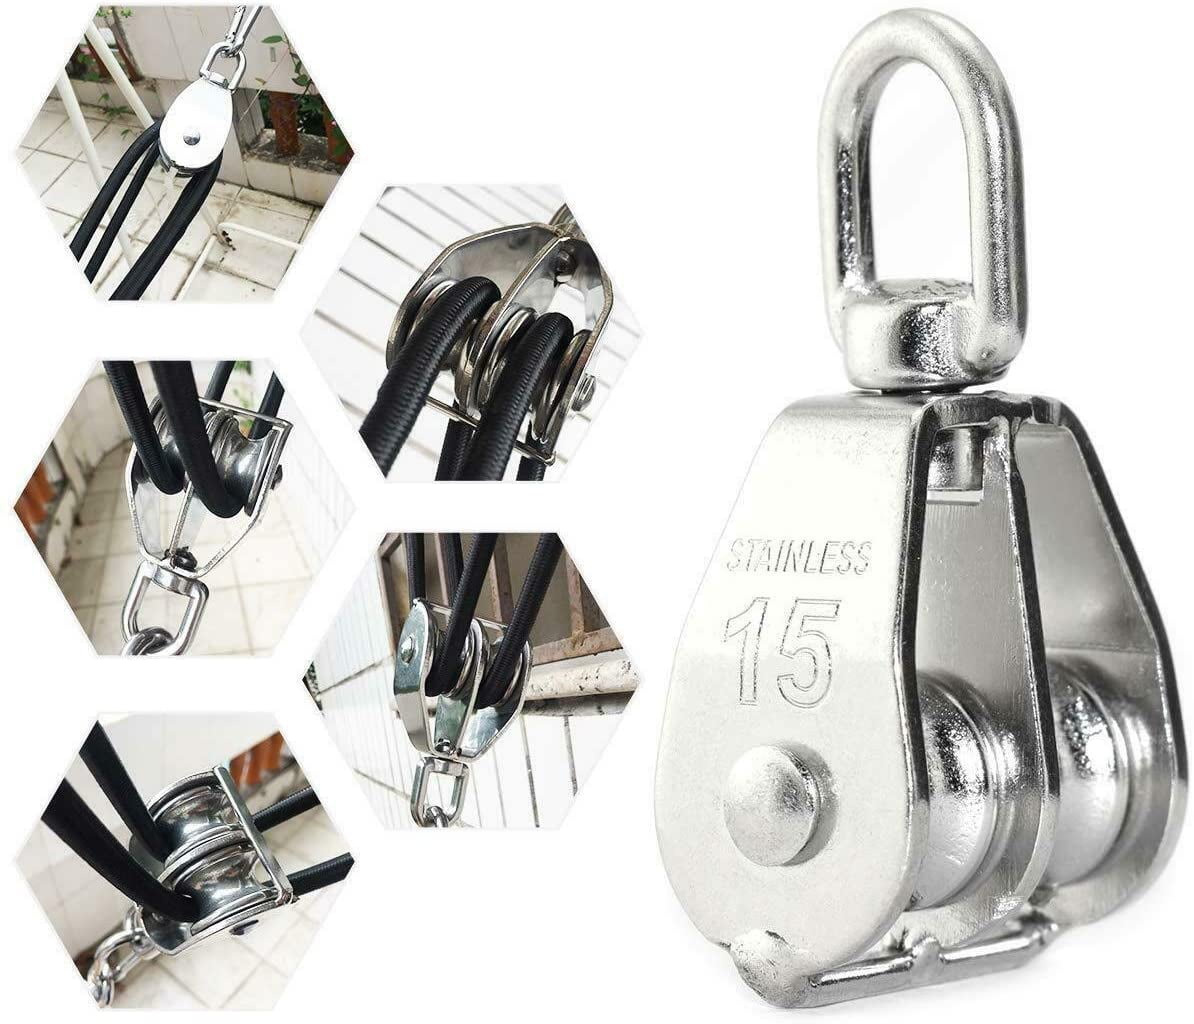 Stainless Steel Swivel Double Wheel Pulley Block Rigging Lifting Rope Lifter New 